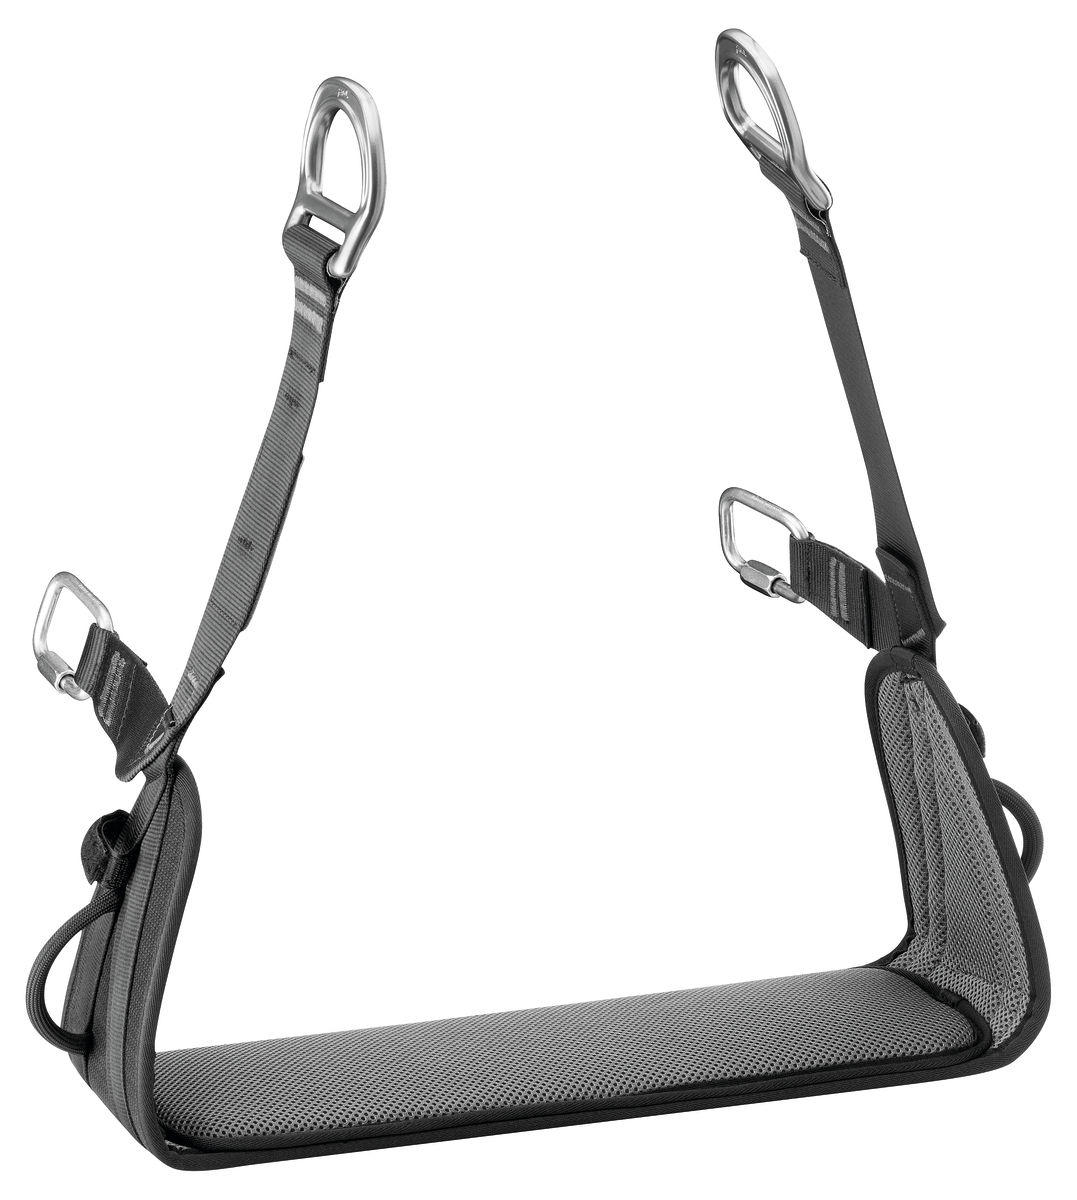 Petzl VOLT International Seat from Columbia Safety